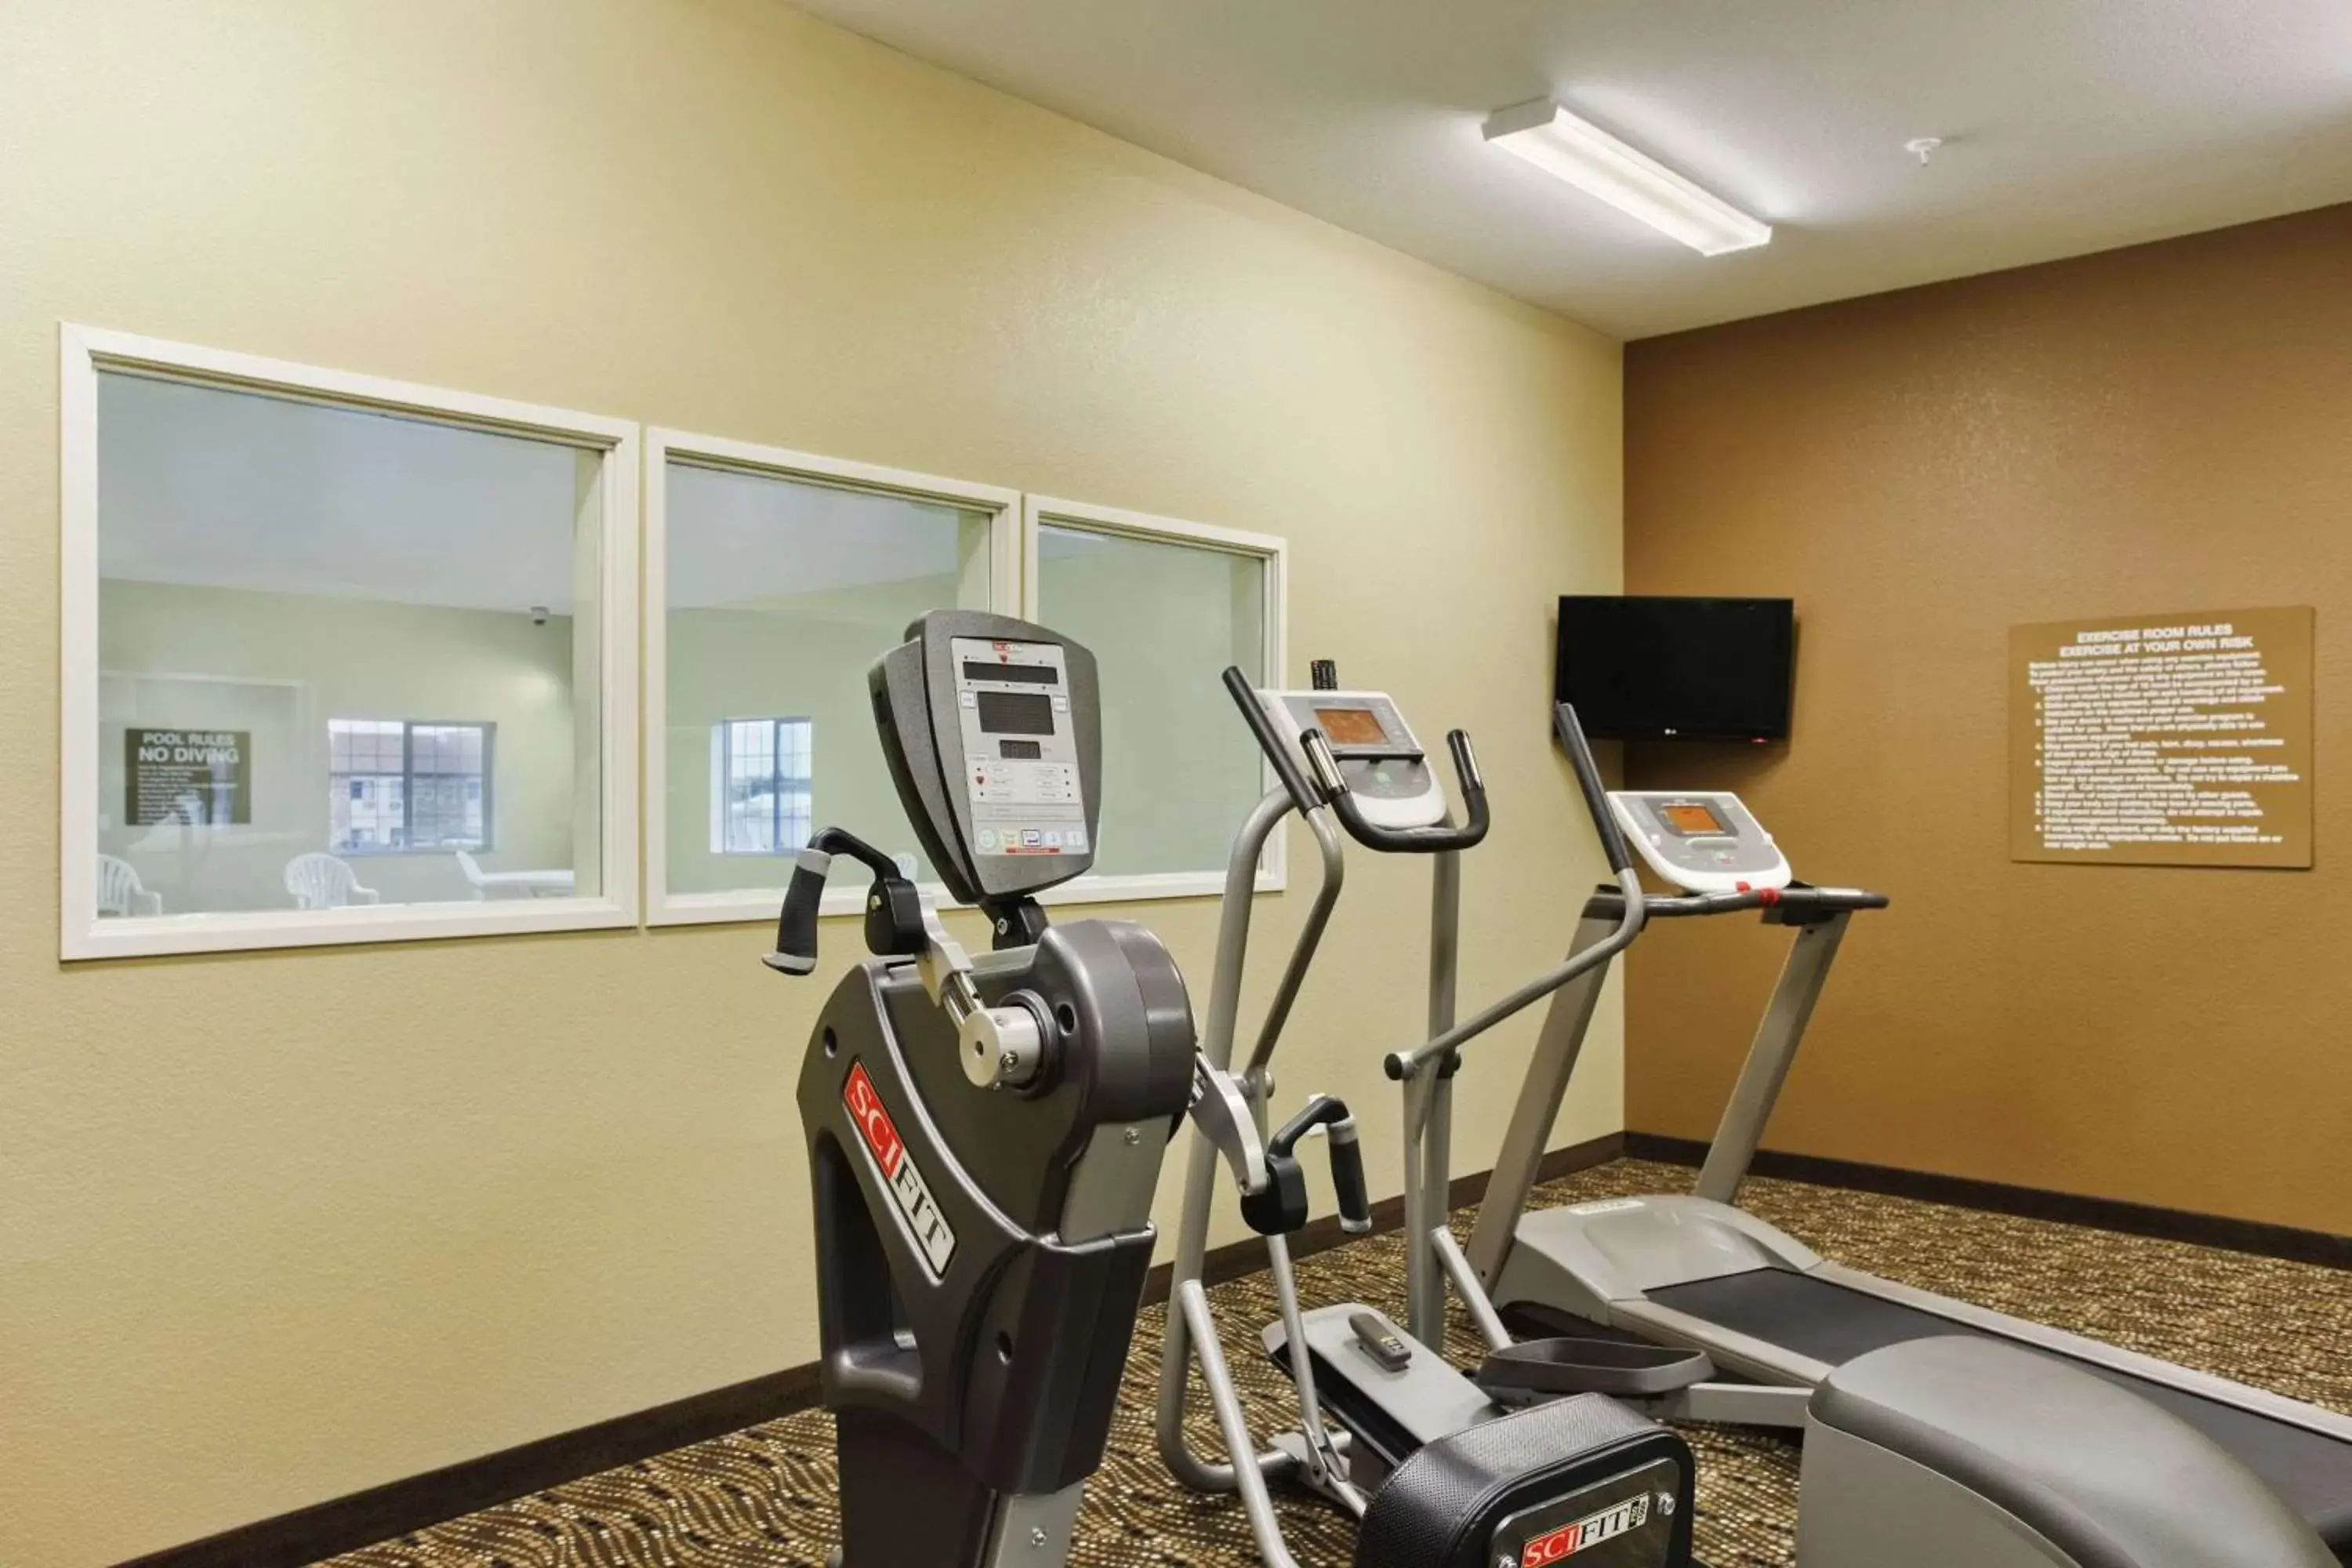 Fitness centre/facilities, Fitness Center/Facilities in Microtel Inn & Suites by Wyndham Williston